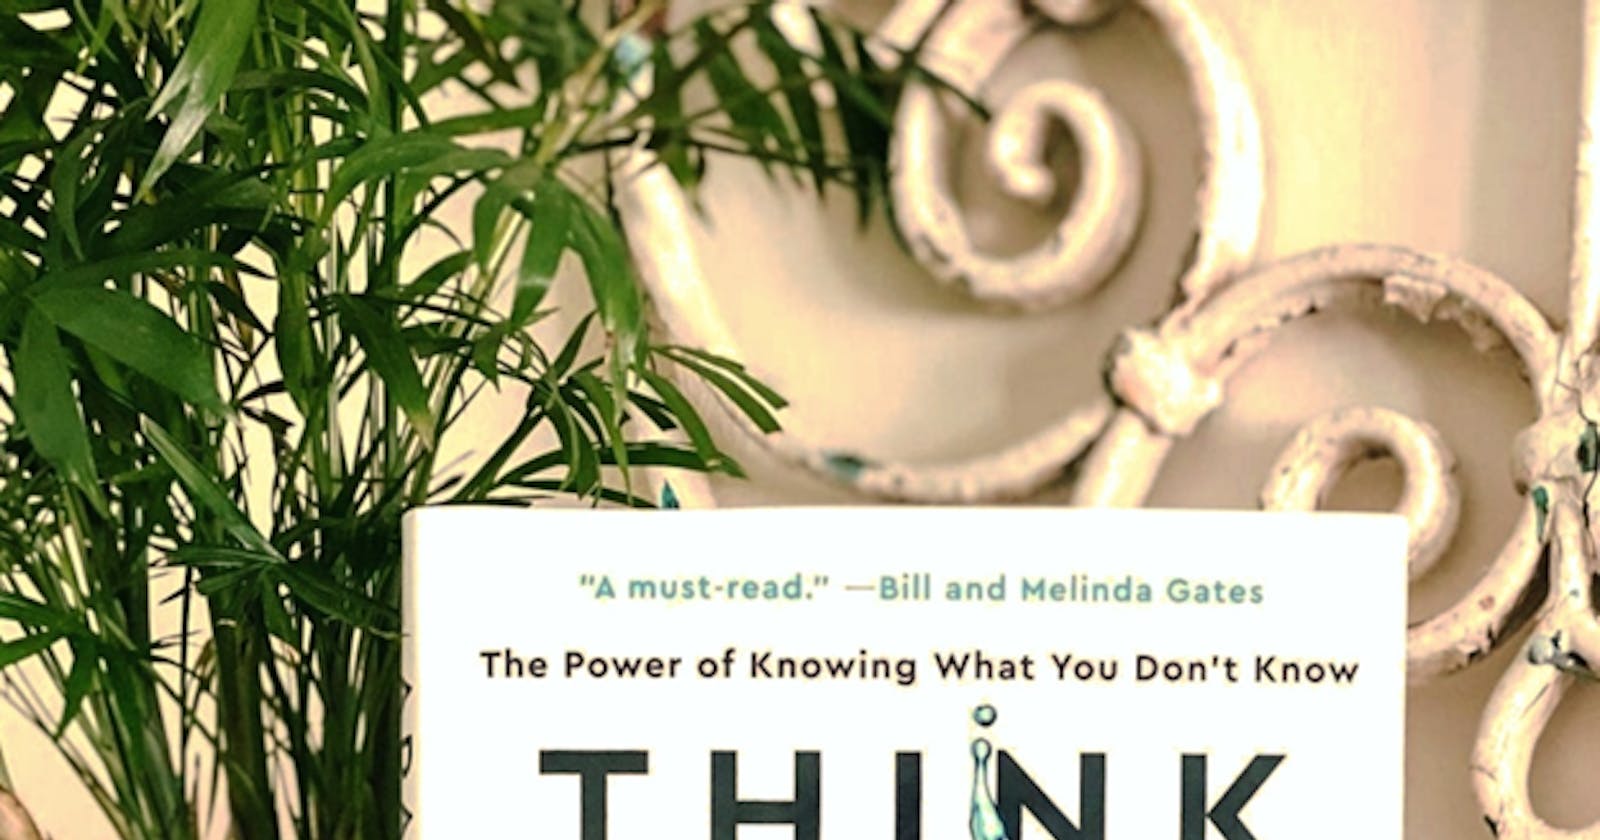 10 TOP Lessons From The Book “Think Again”: